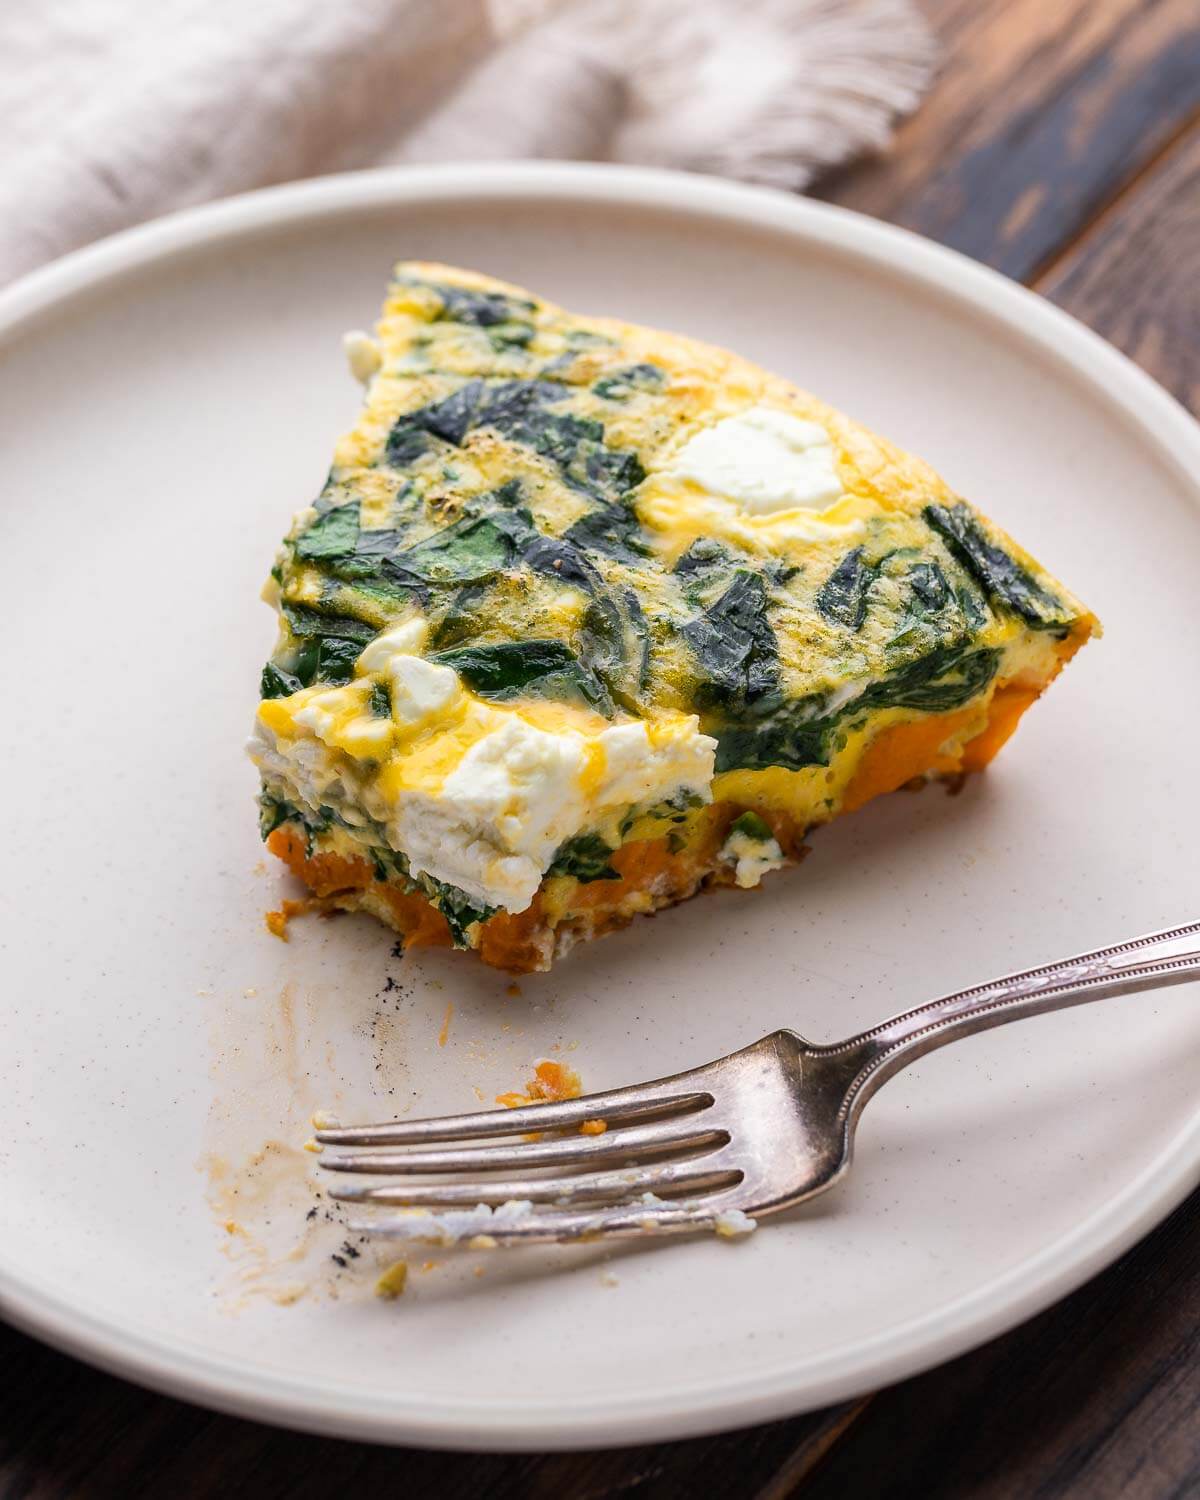 Sweet potato and goat cheese frittata in white plate with a bite taken out of it.